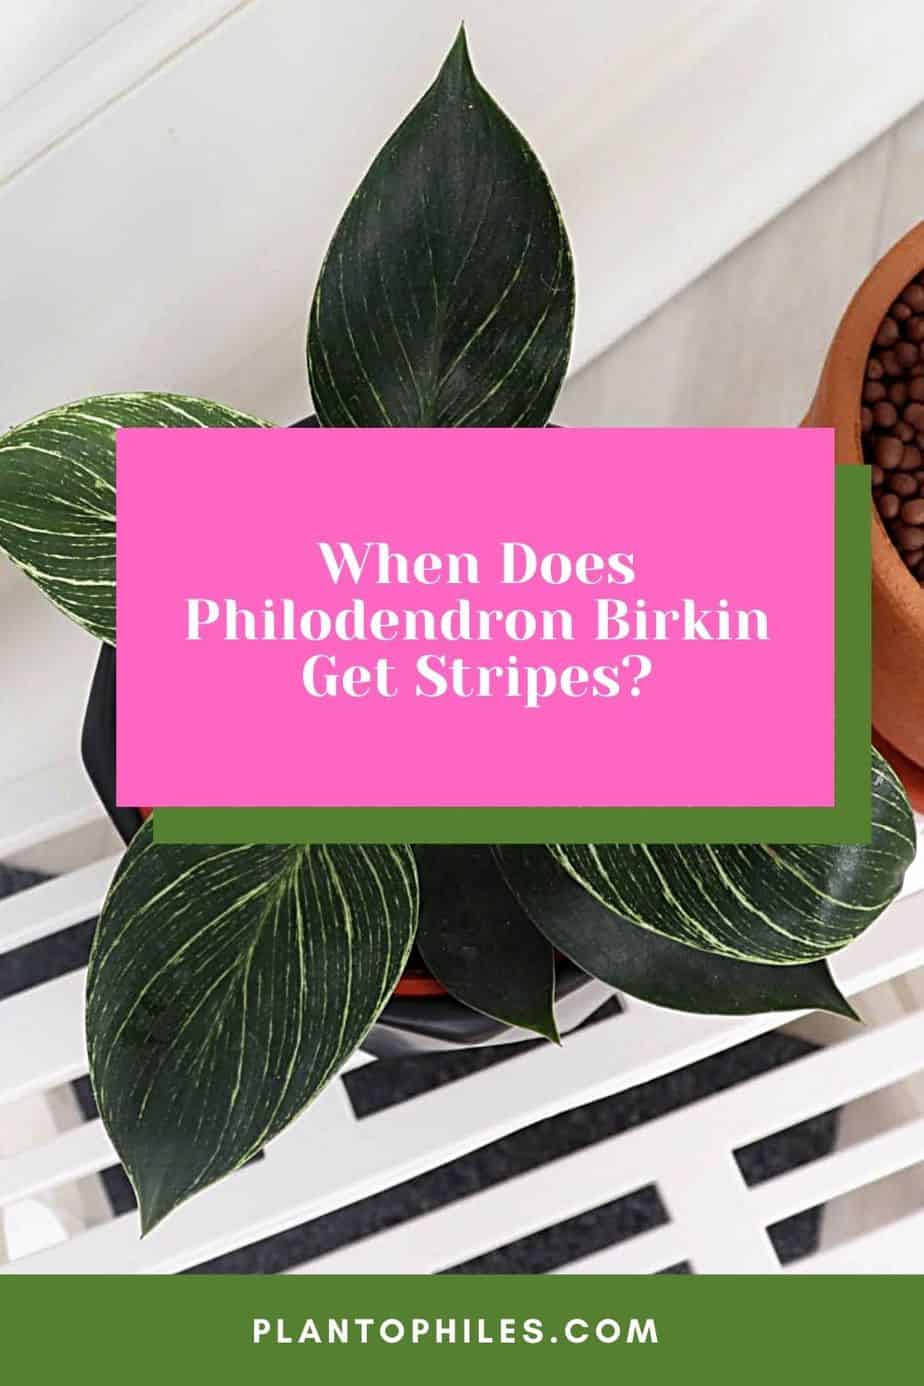 When Does Philodendron Birkin Get Stripes